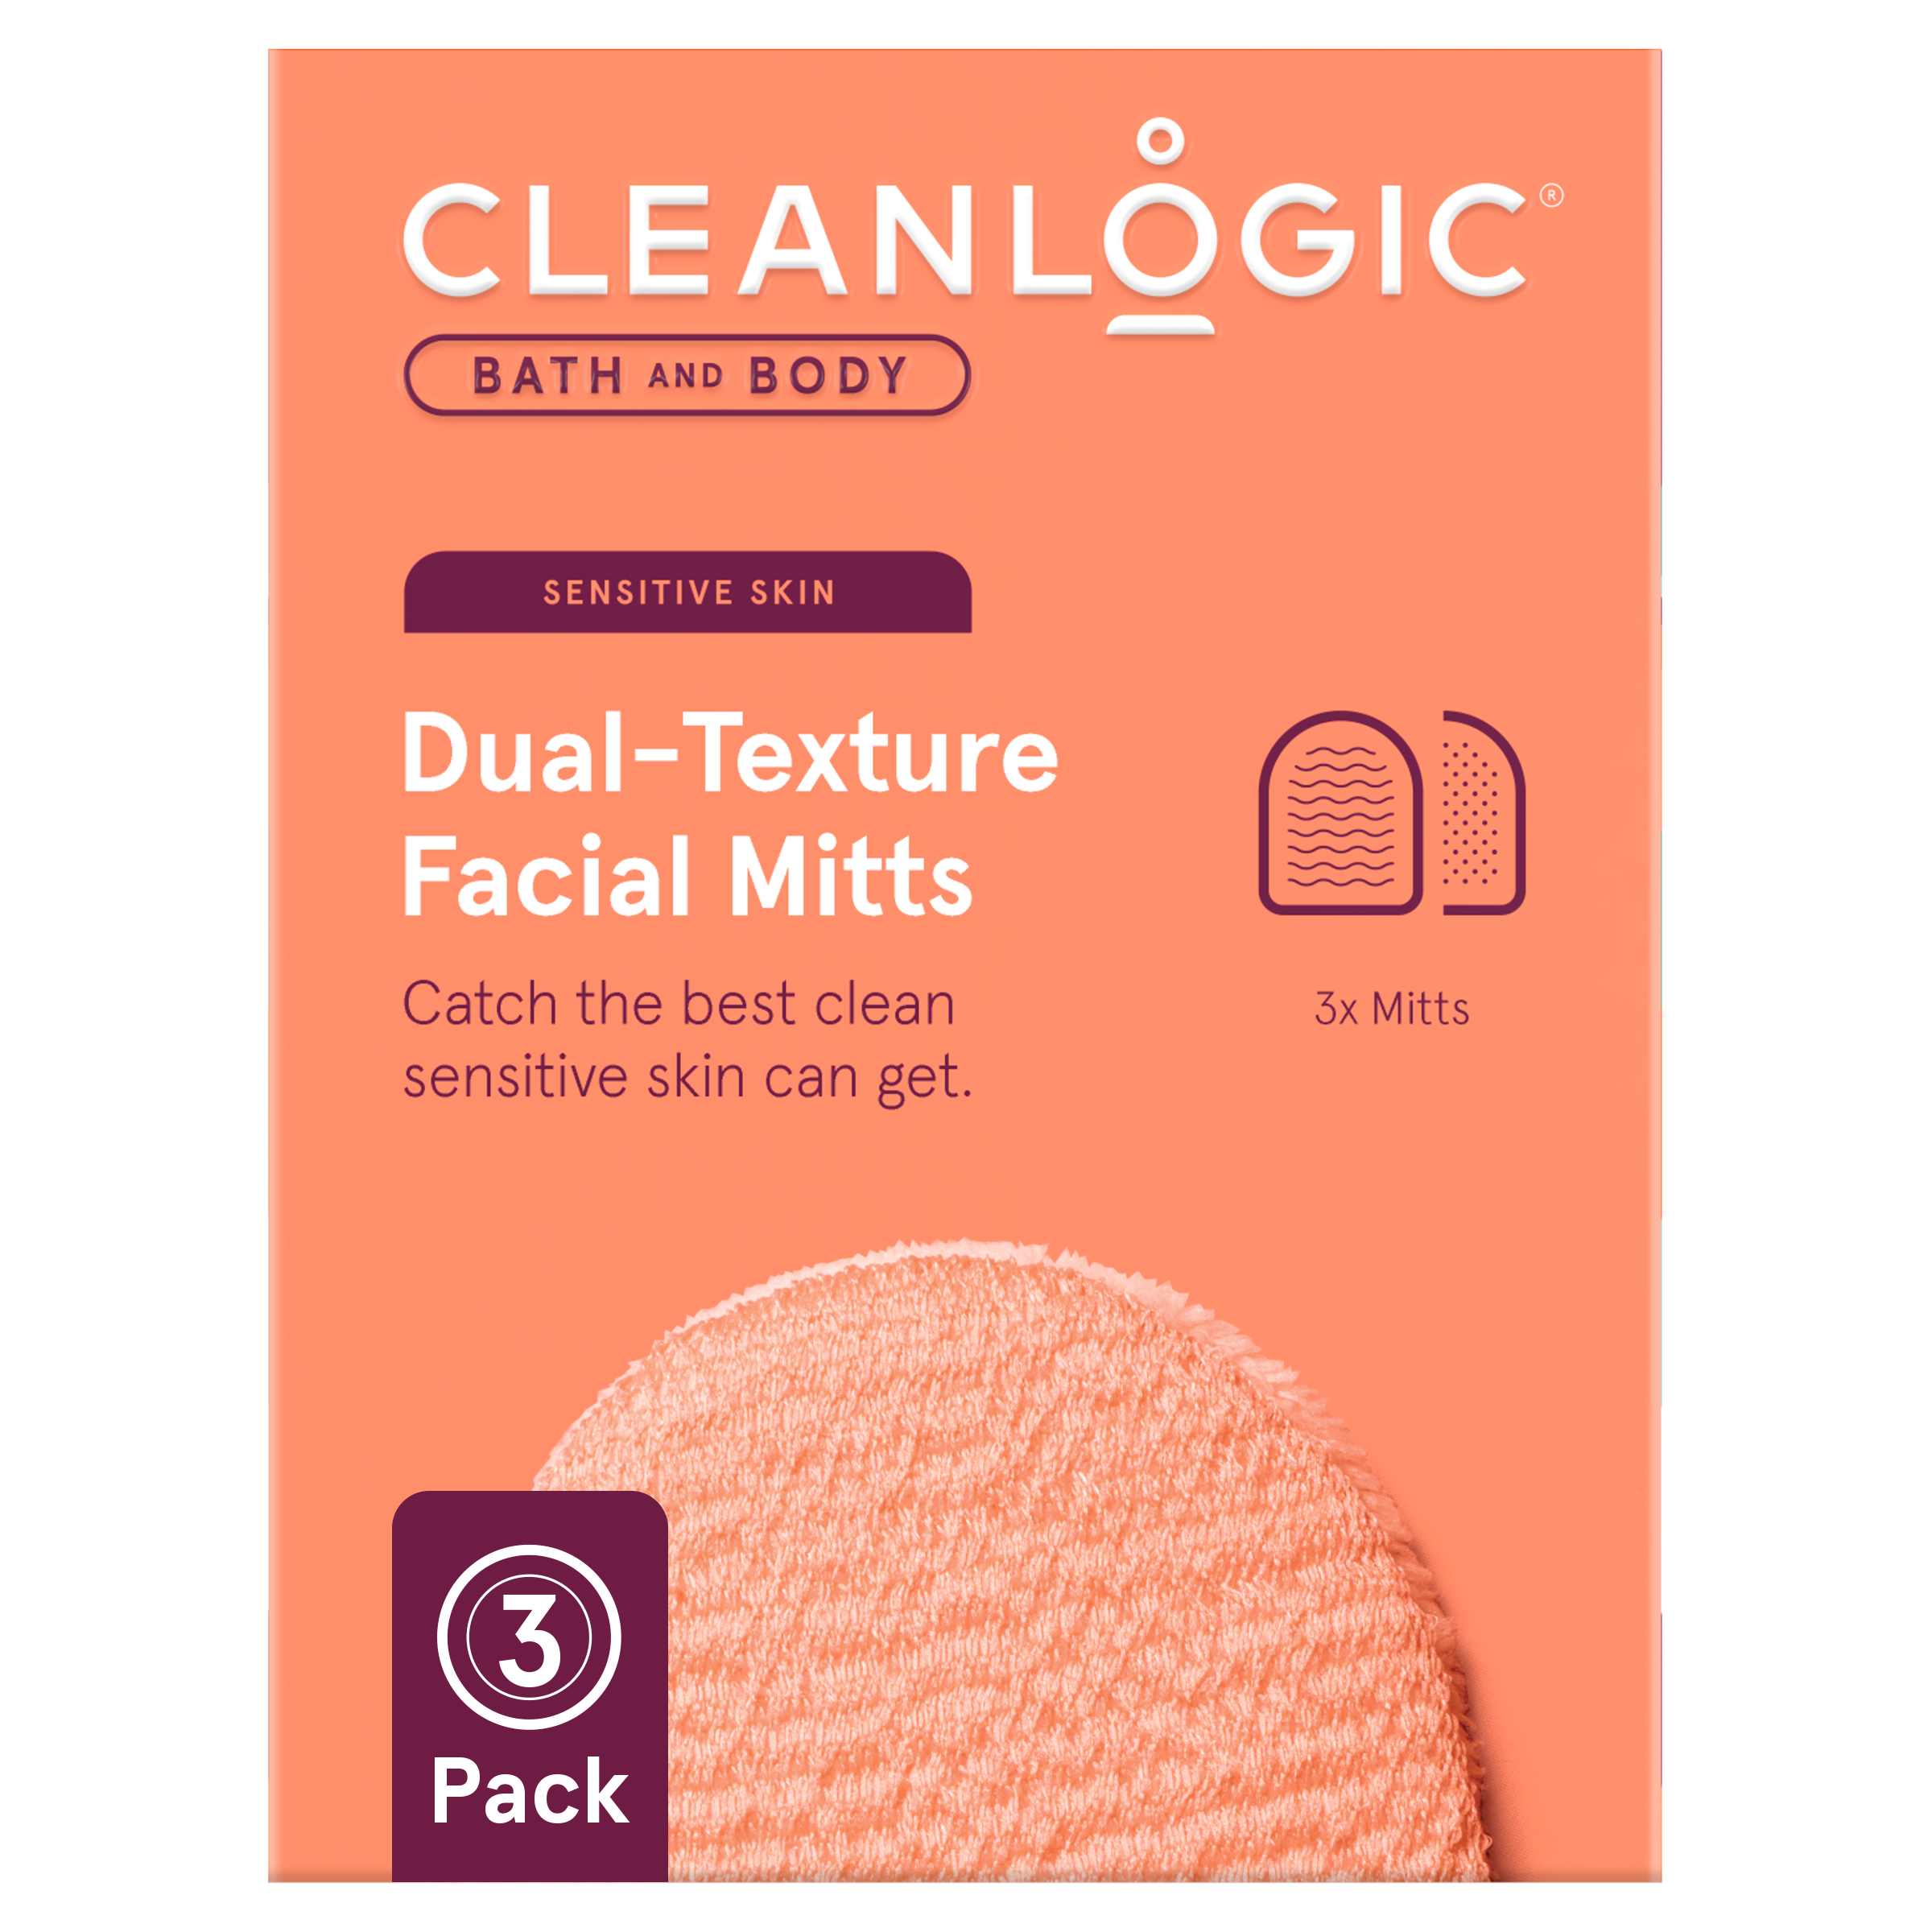 Bath and Body Sensitive Skin Dual-Texture Facial Mitts, Assorted Colors, 3 Count